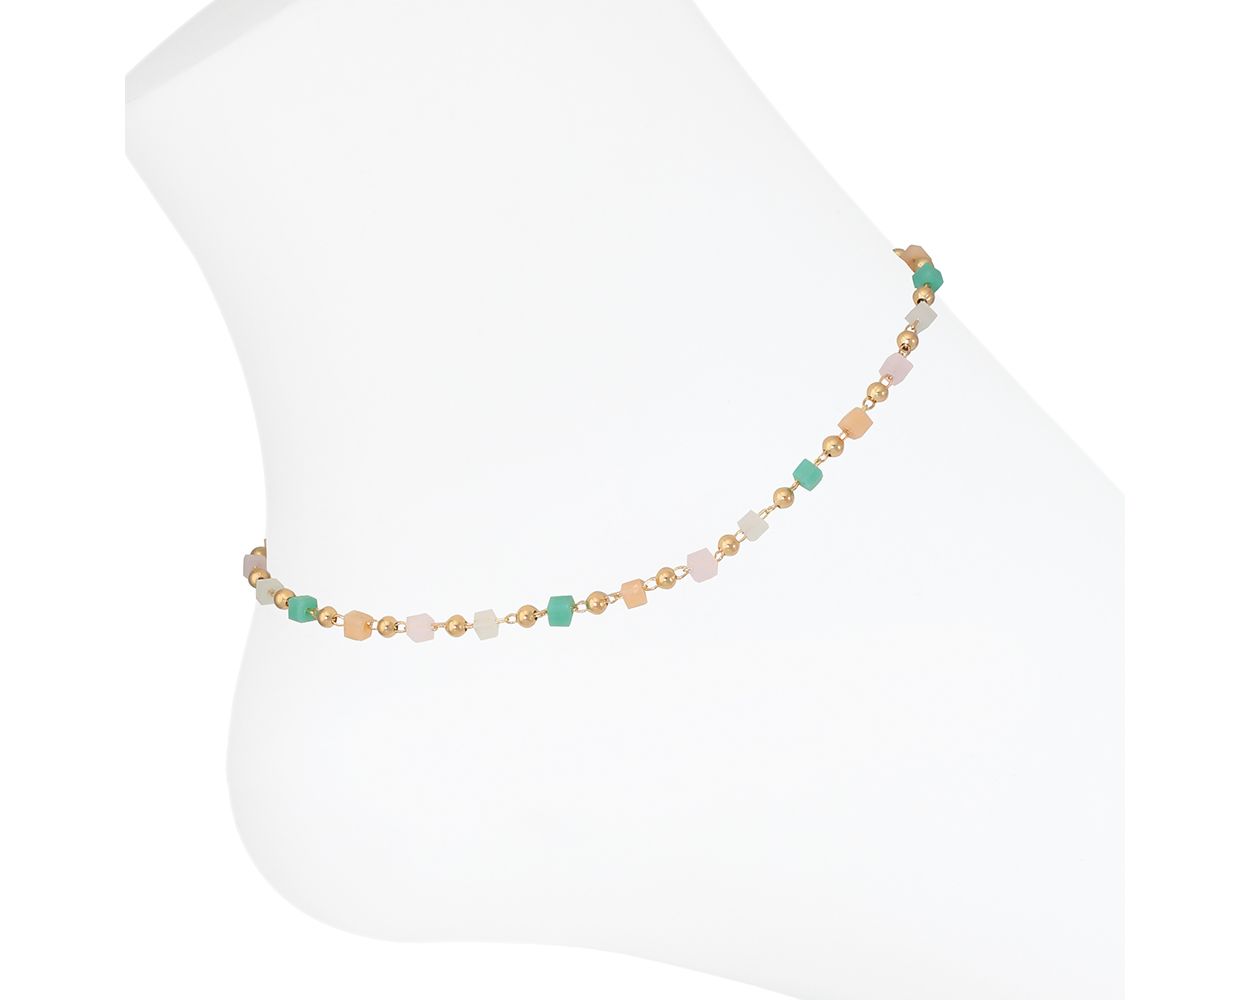 Periwinkle Blush Bead Anklet